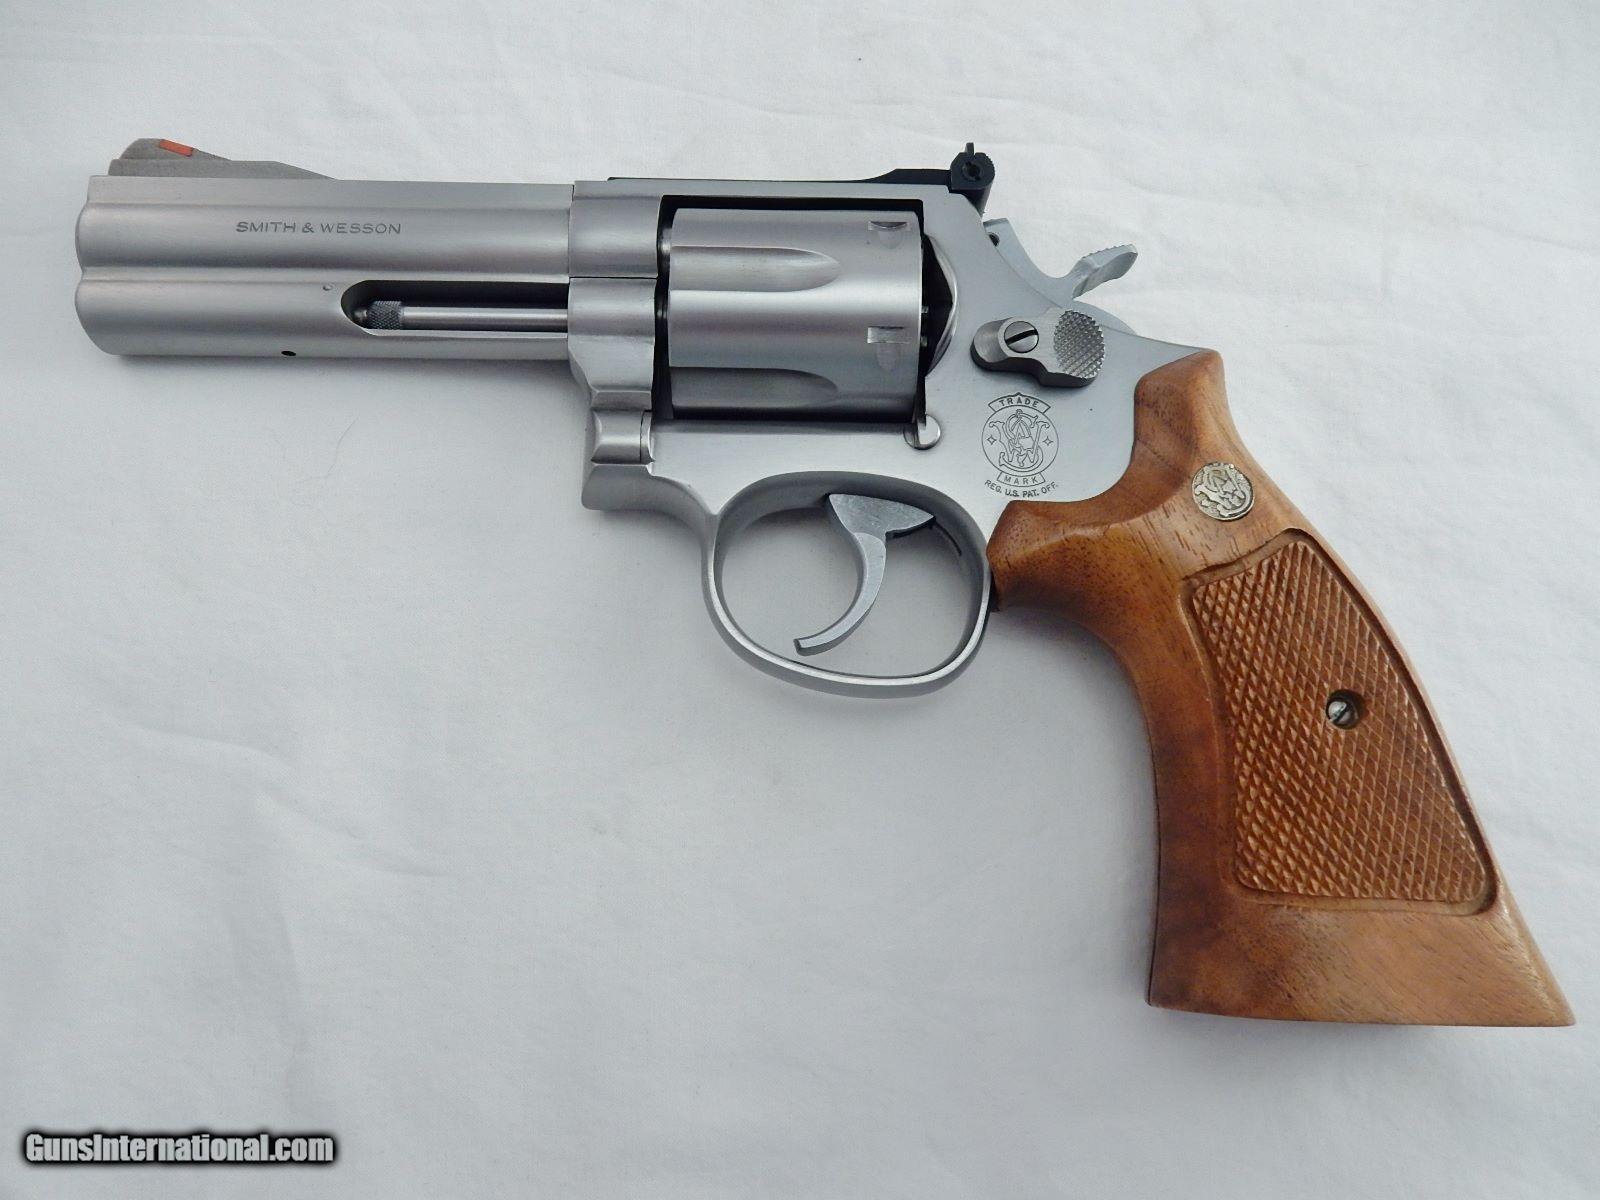 Smith And Wesson 686 2 Inch Barrel